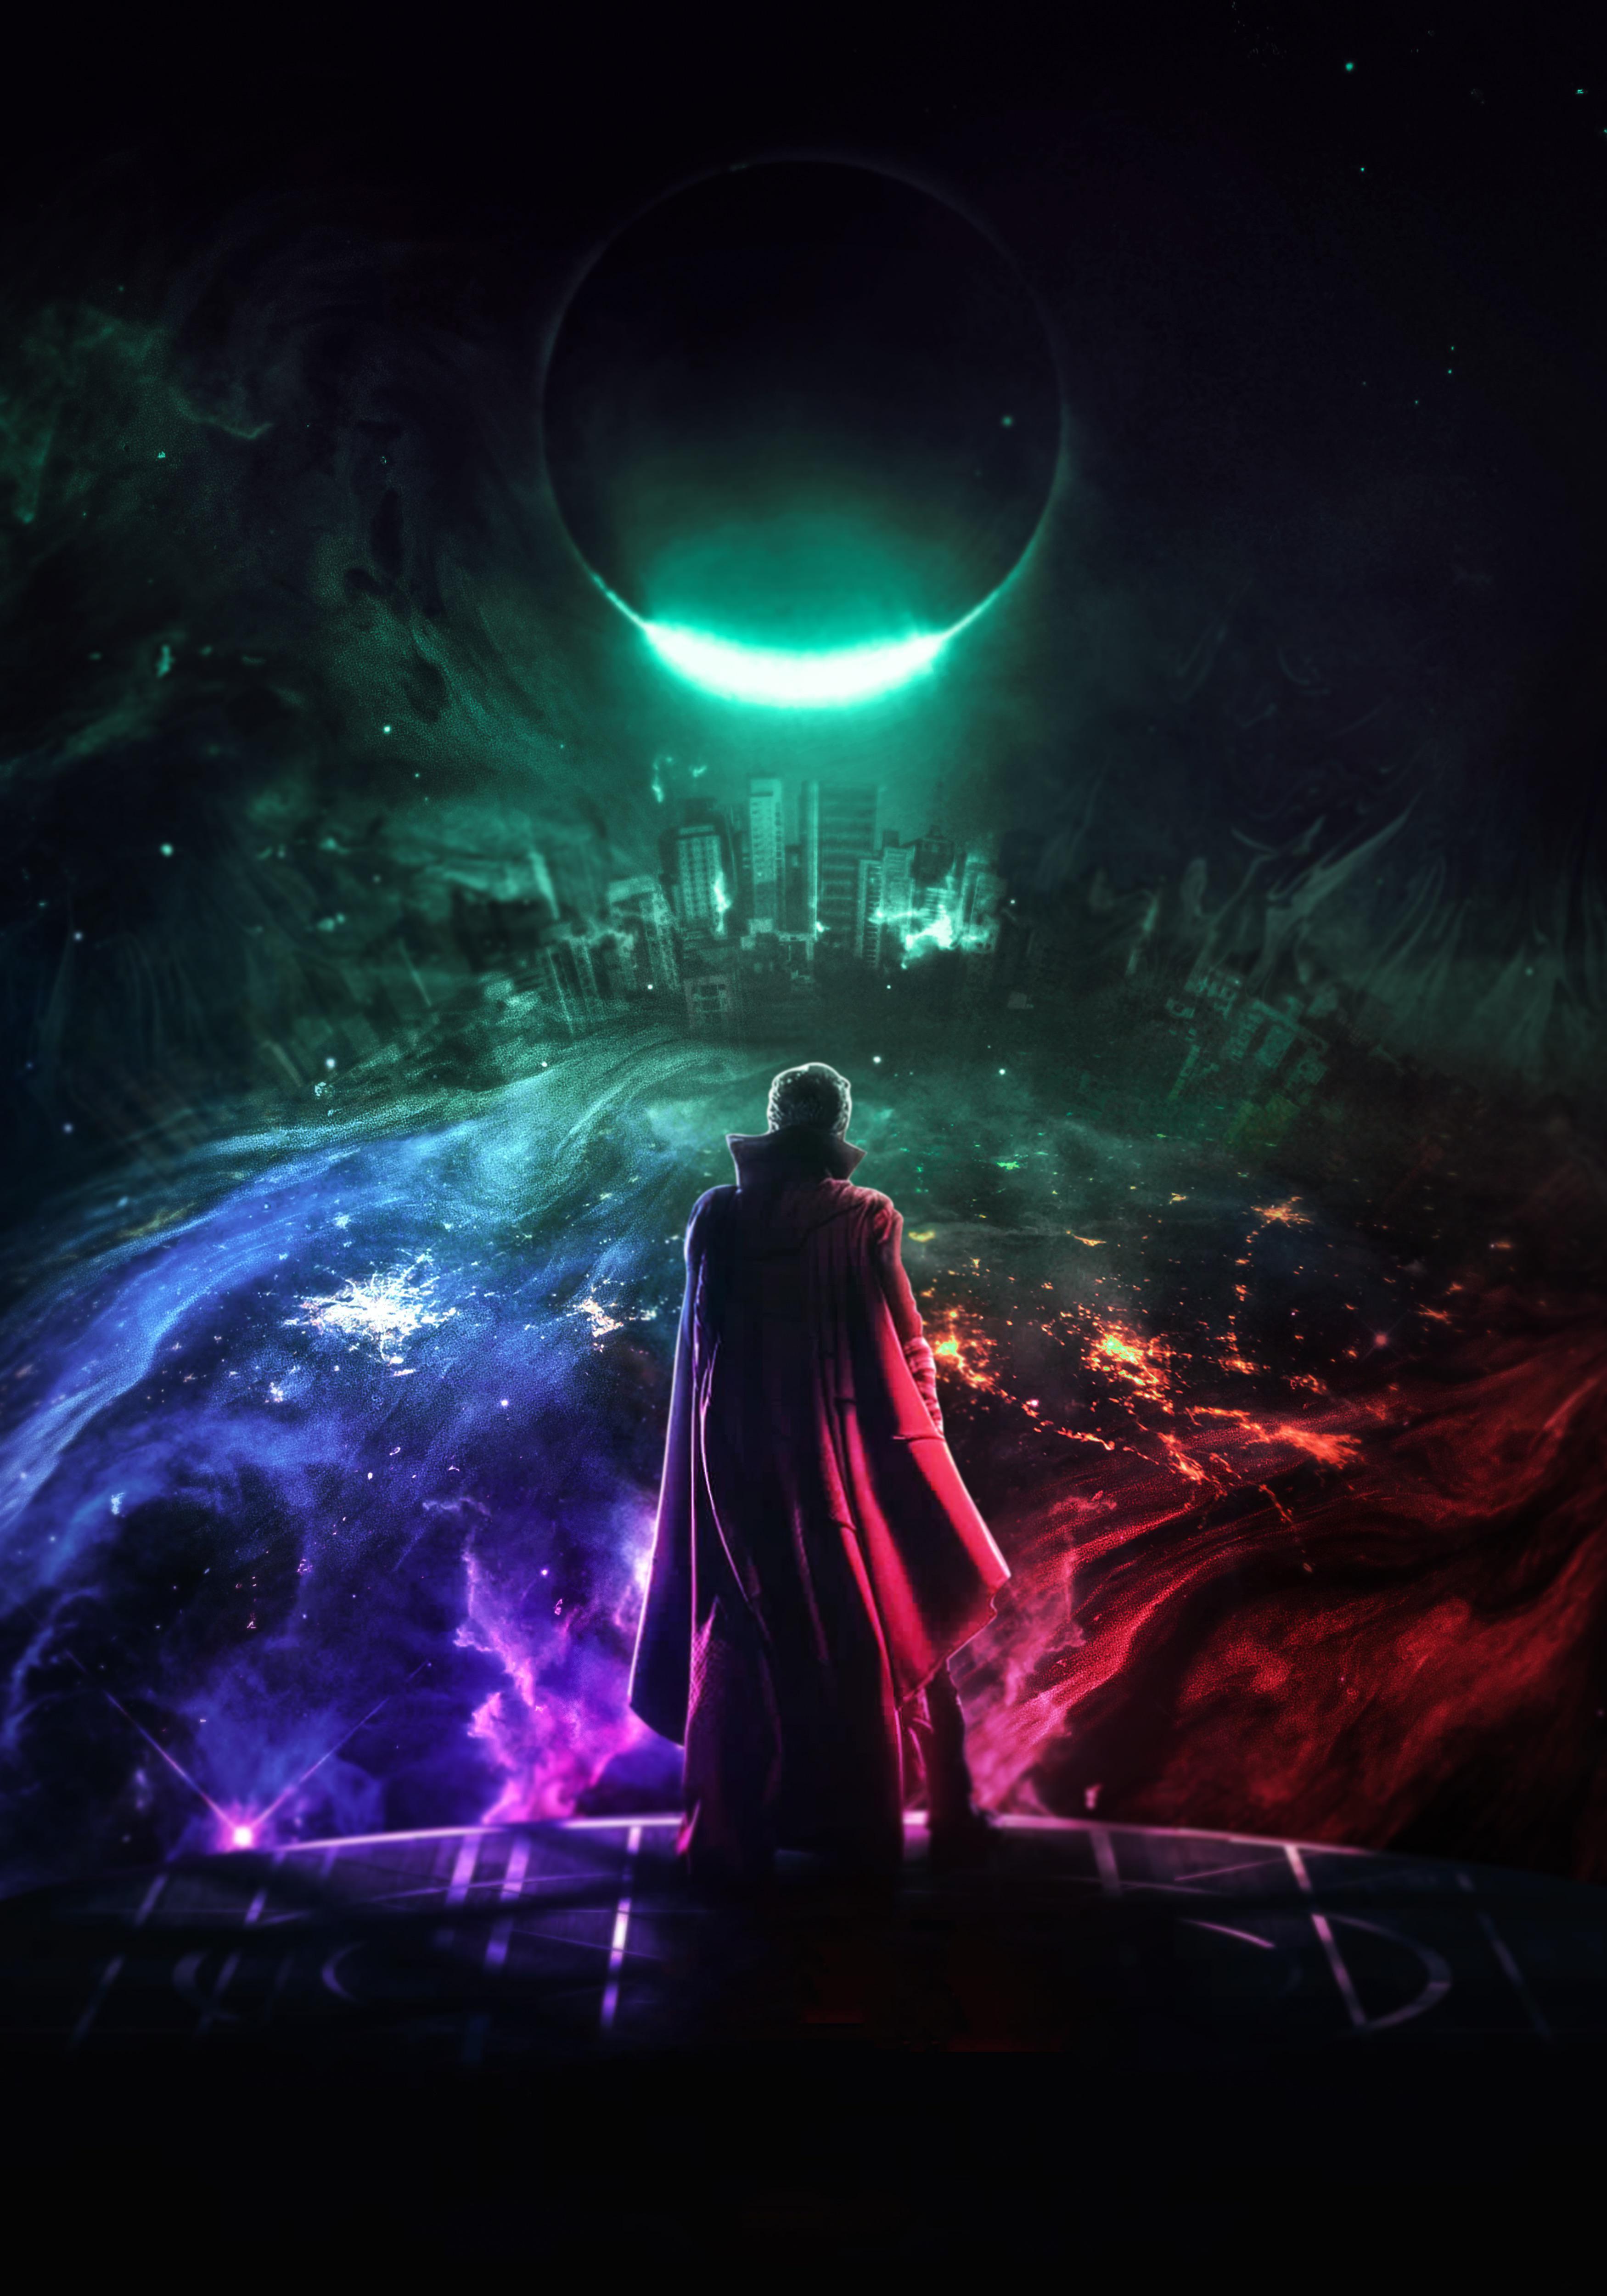 Doctor Strange in the Multiverse of M for windows instal